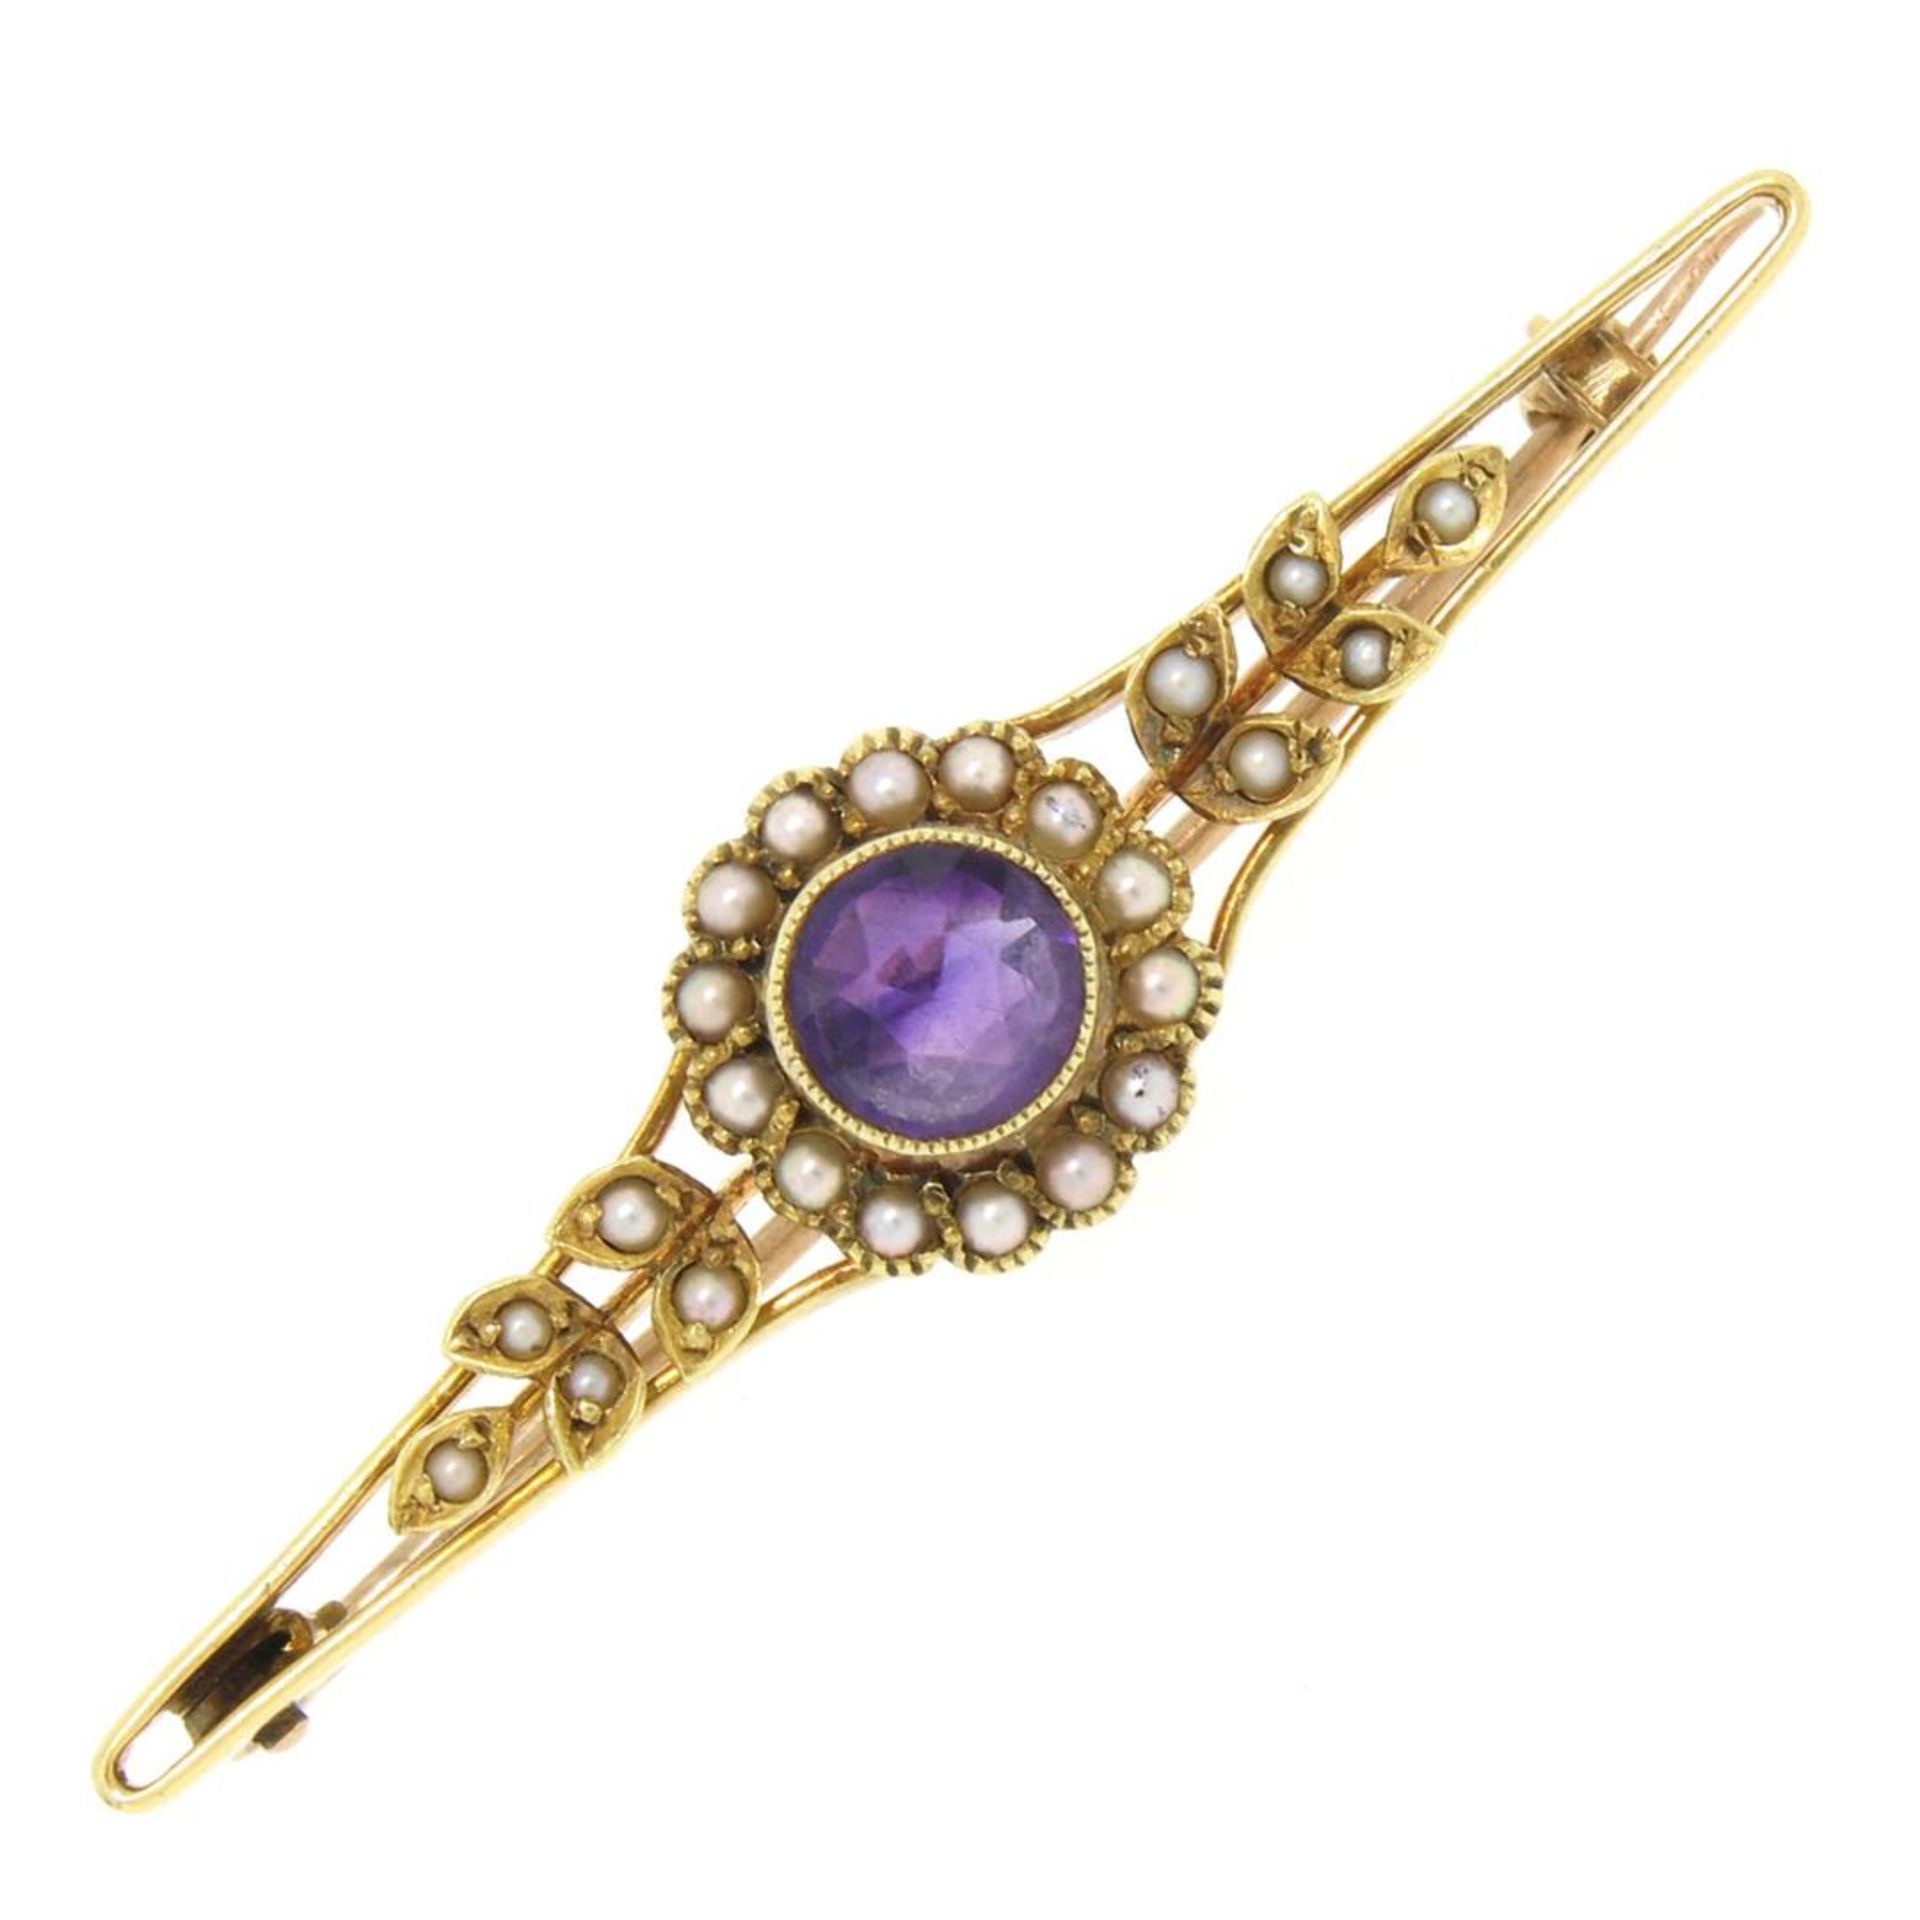 15k Yellow Gold .64 ct Old Cut Amethyst & Seed Pearl Brooch Pin